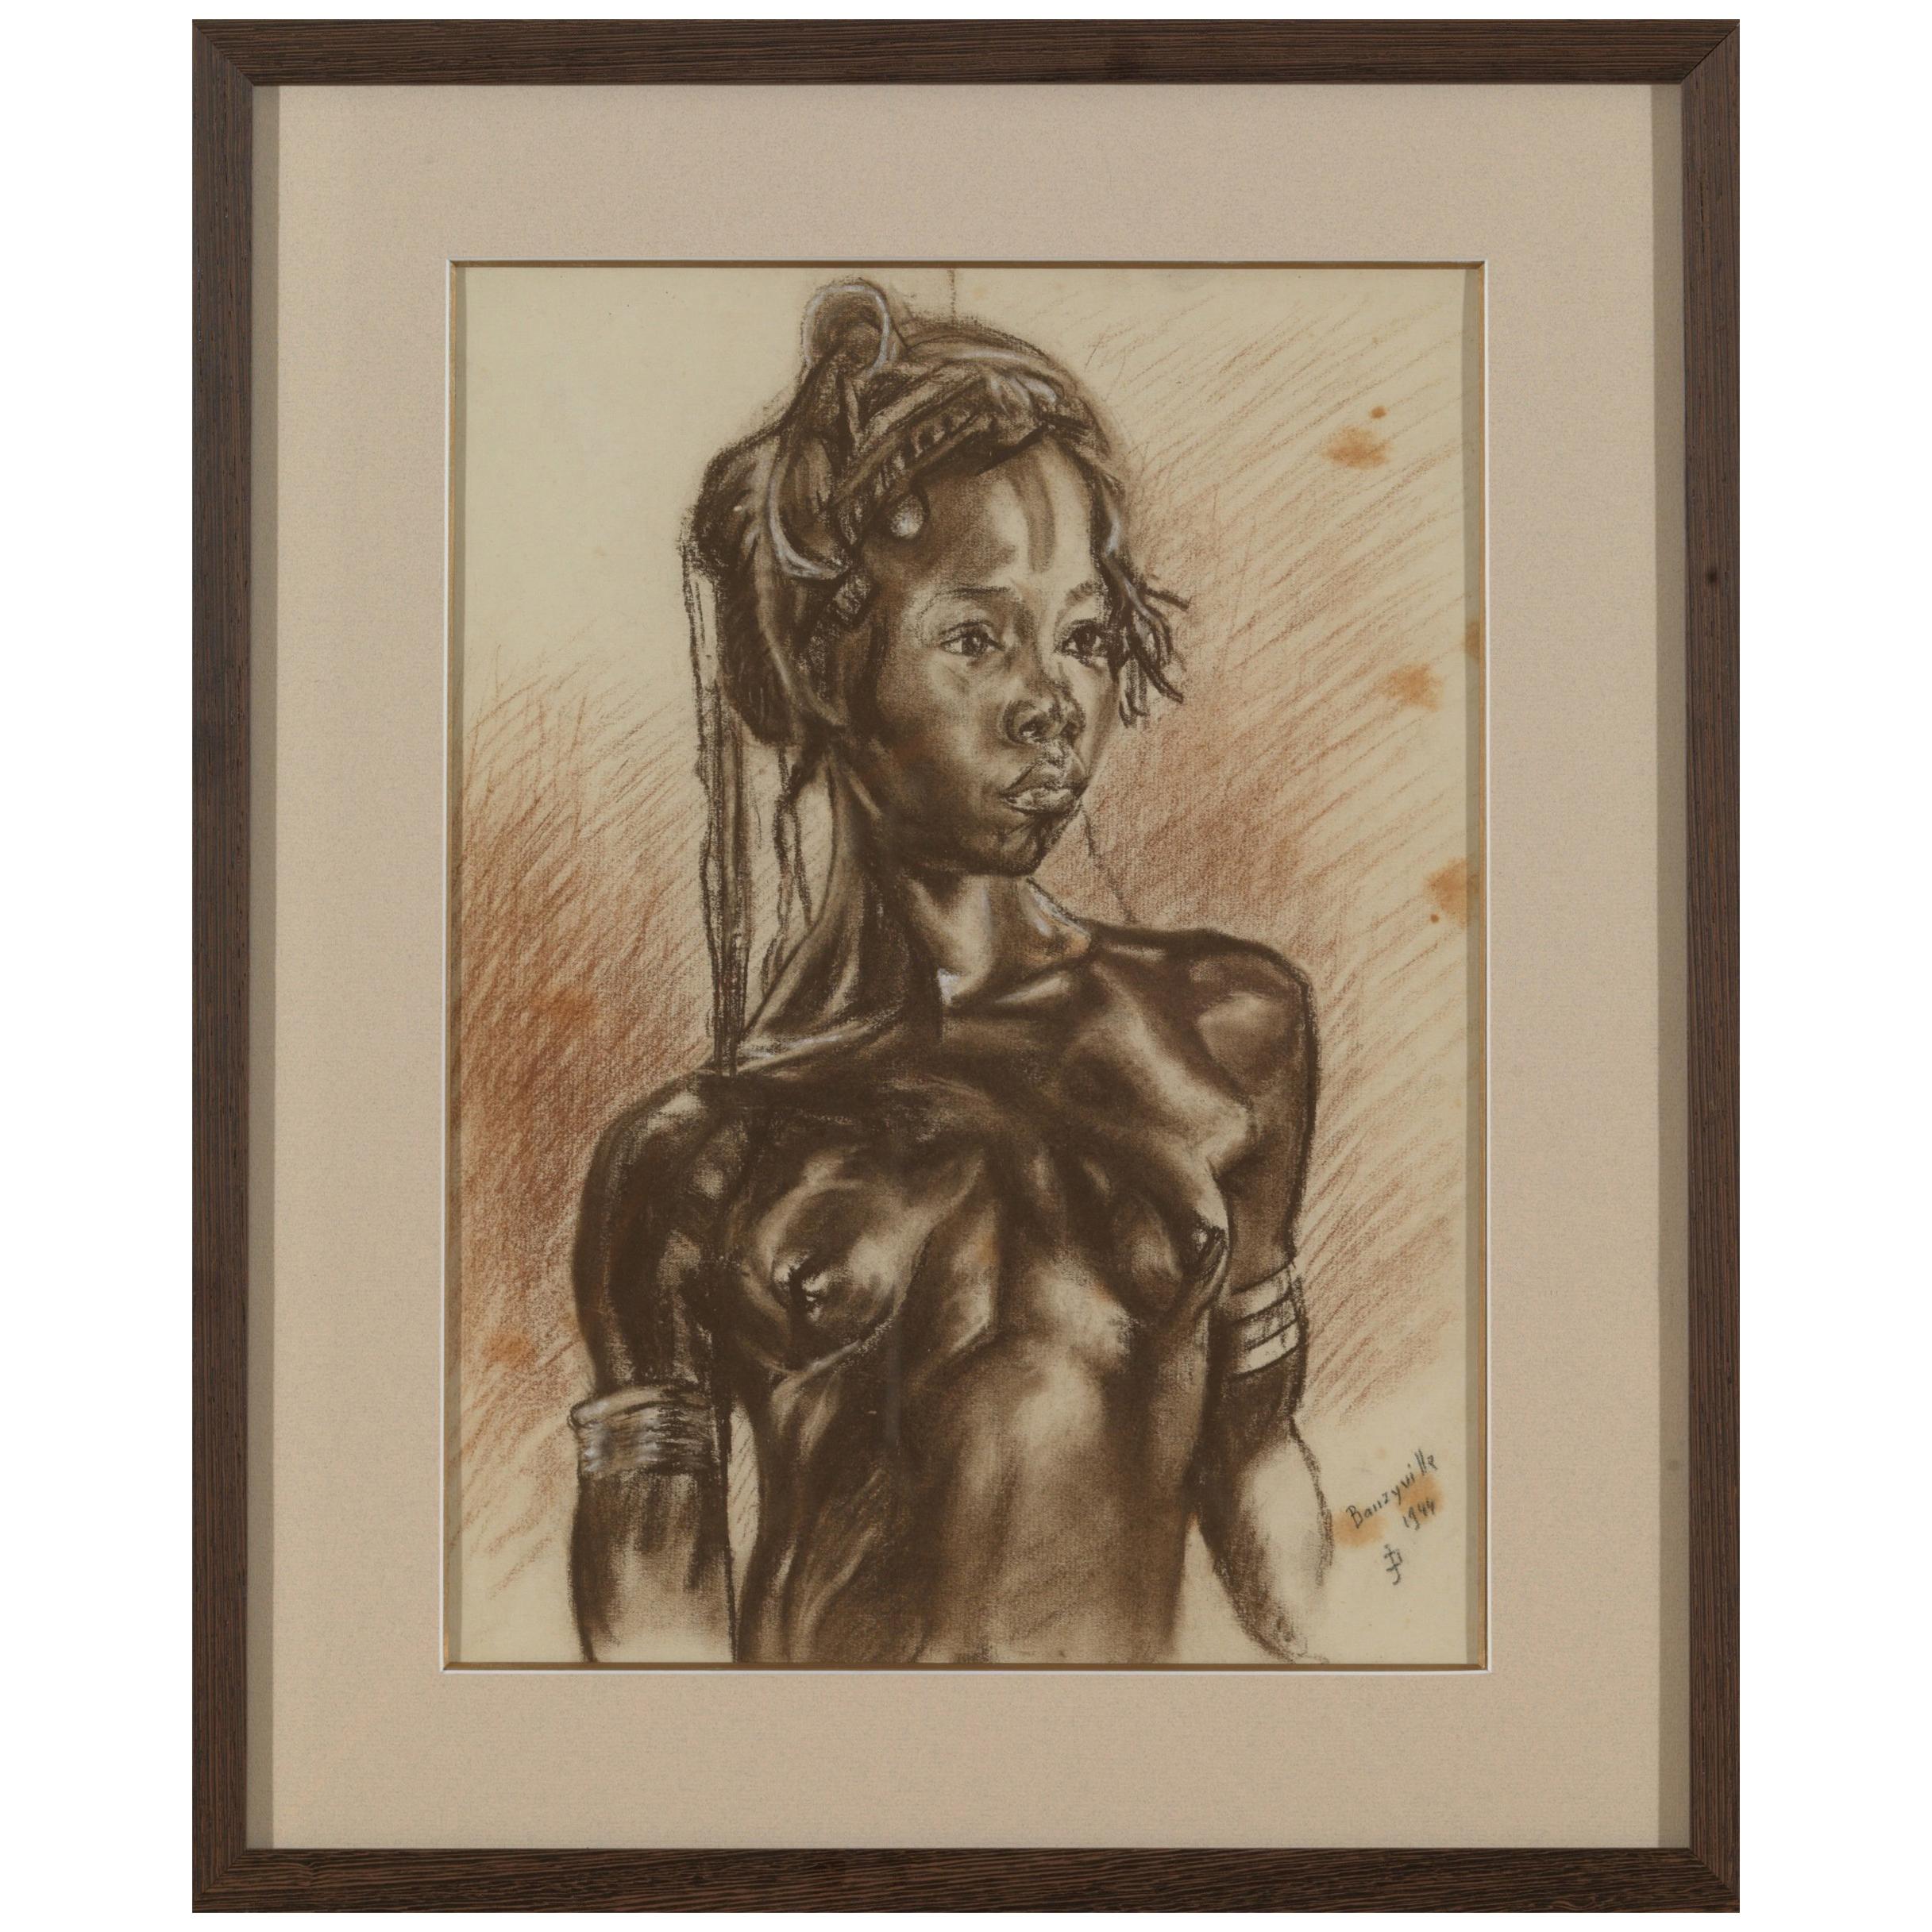 C.P. Initials, Portait of African Girl, Charcoal on Paper, Signed Banzyville 1944 For Sale